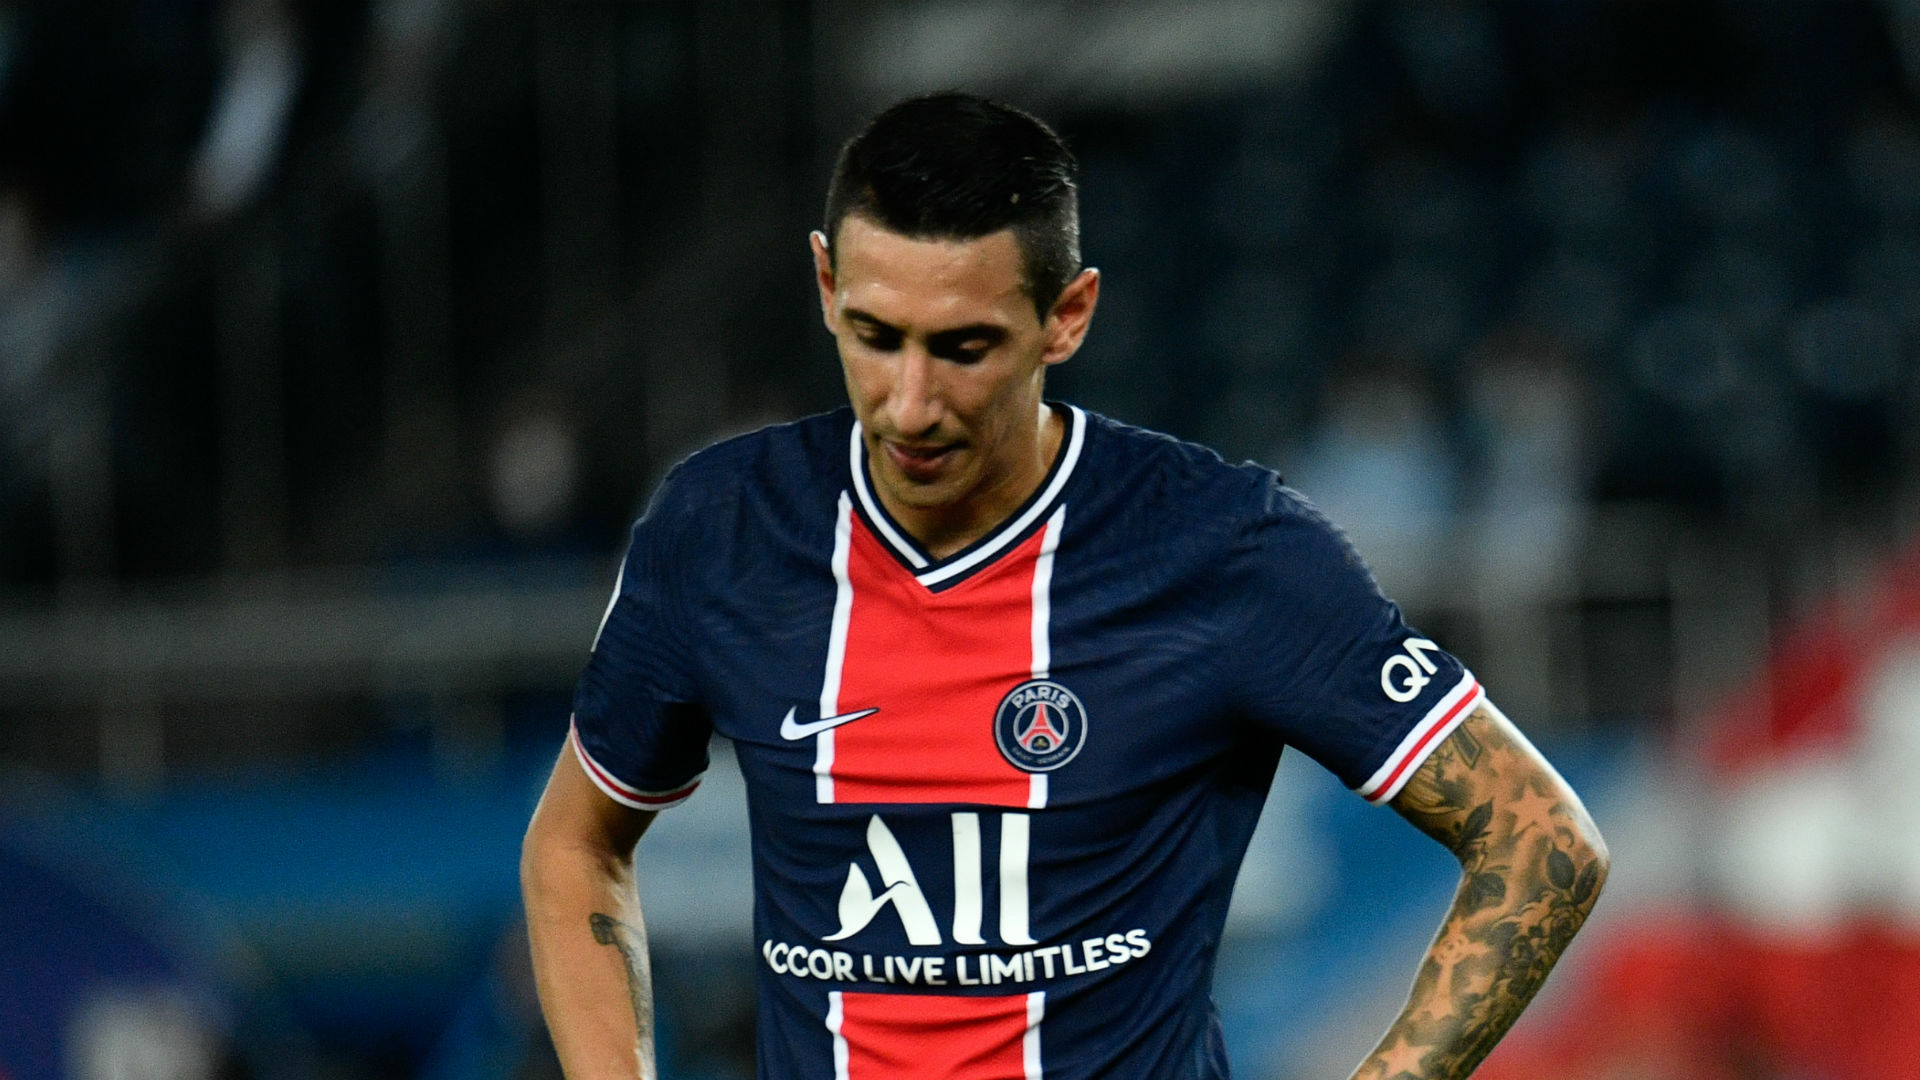 Angel Di Maria will miss four Ligue 1 matches after the Argentine was suspended for an incident involving Marseille's Alvaro.